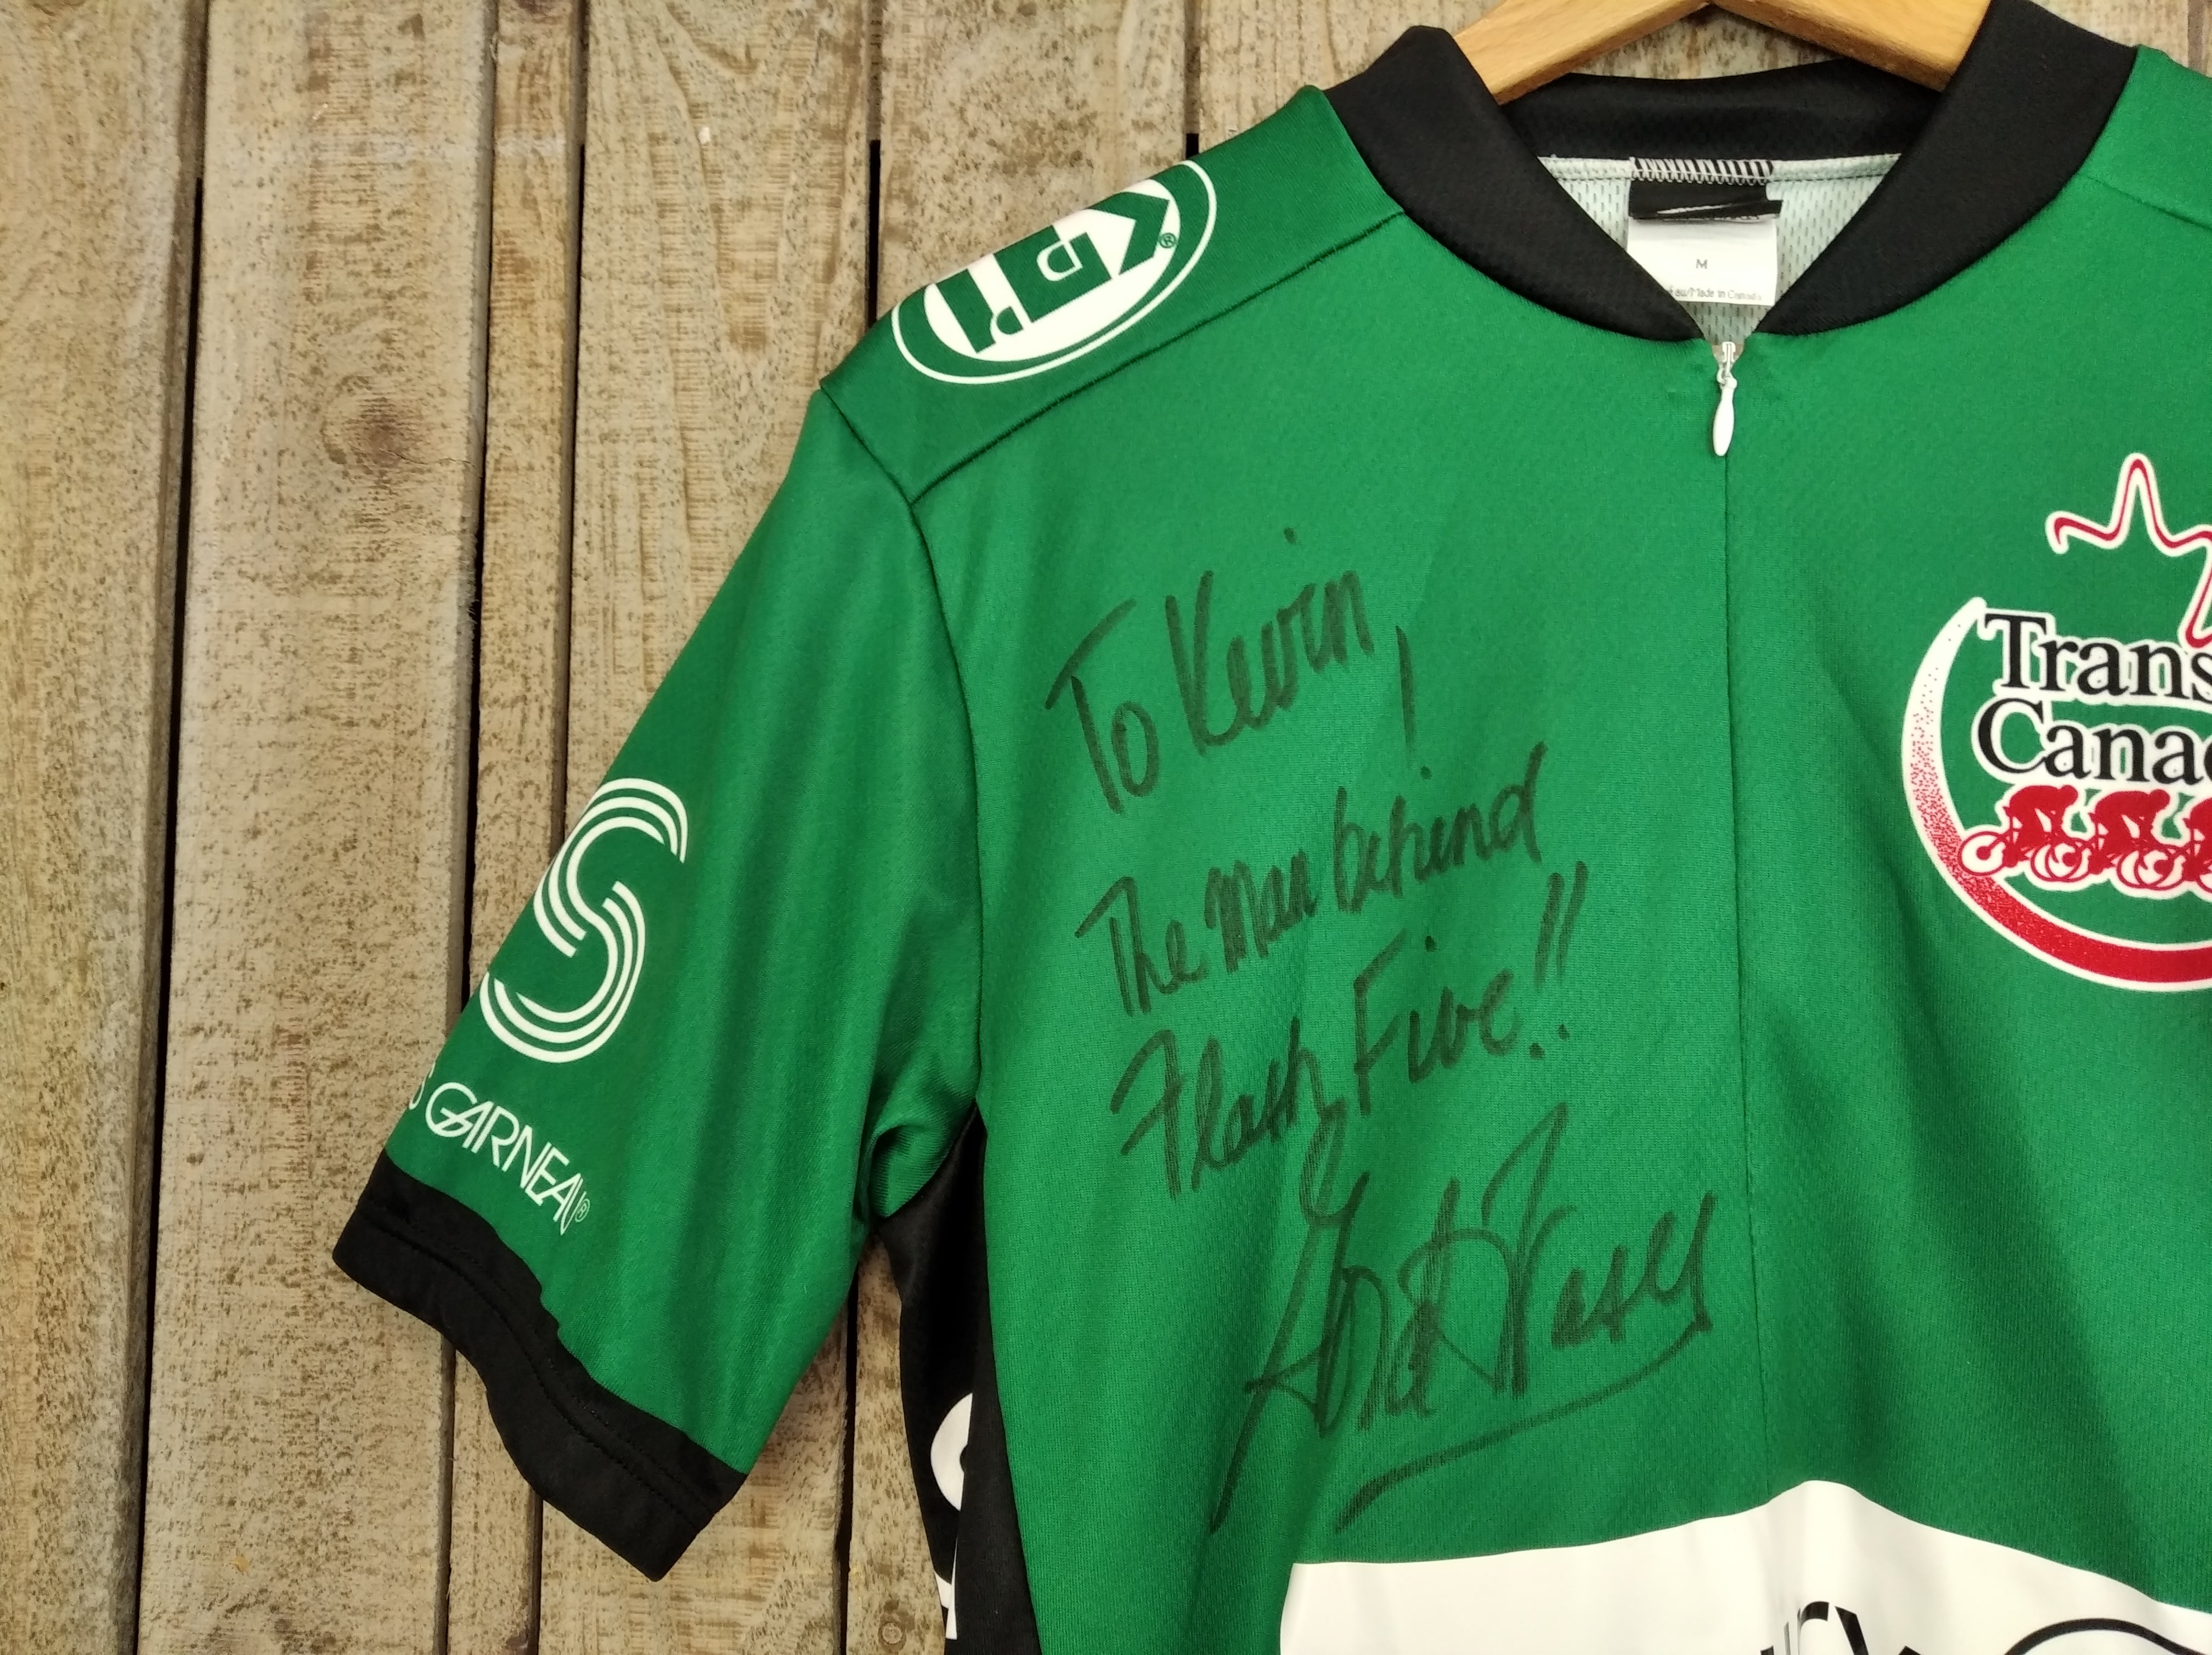 Gord Fraser Signed 1999 Tour Trans Canada Point Classification Jersey by Louis Garneau